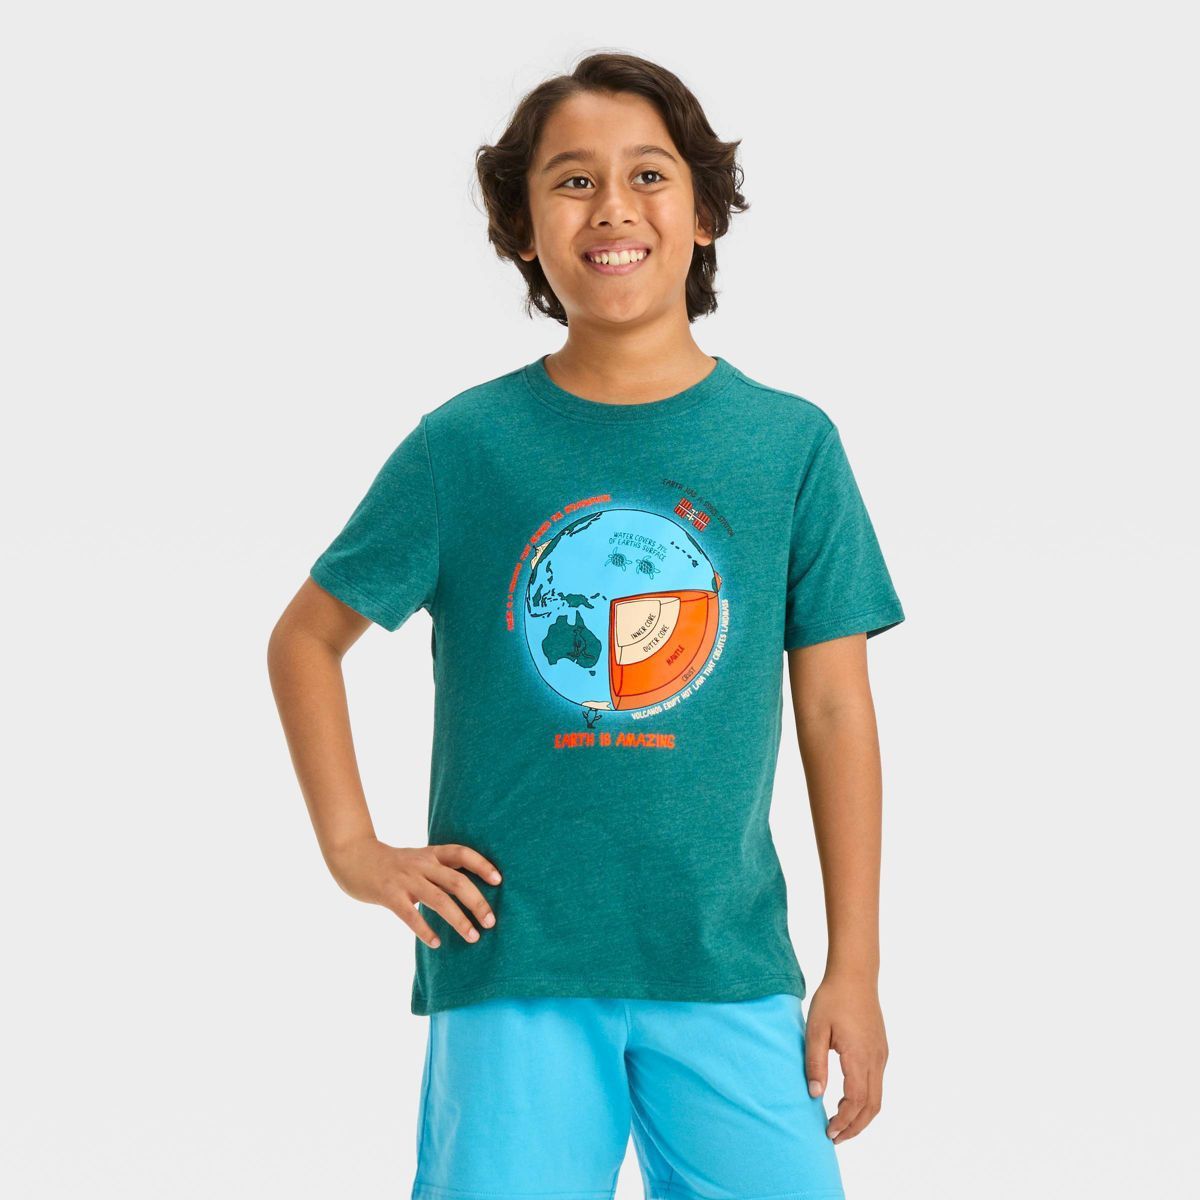 Boys' Short Sleeve 'Earth is Amazing' Graphic T-Shirt - Cat & Jack™ Dark Teal Green M | Target